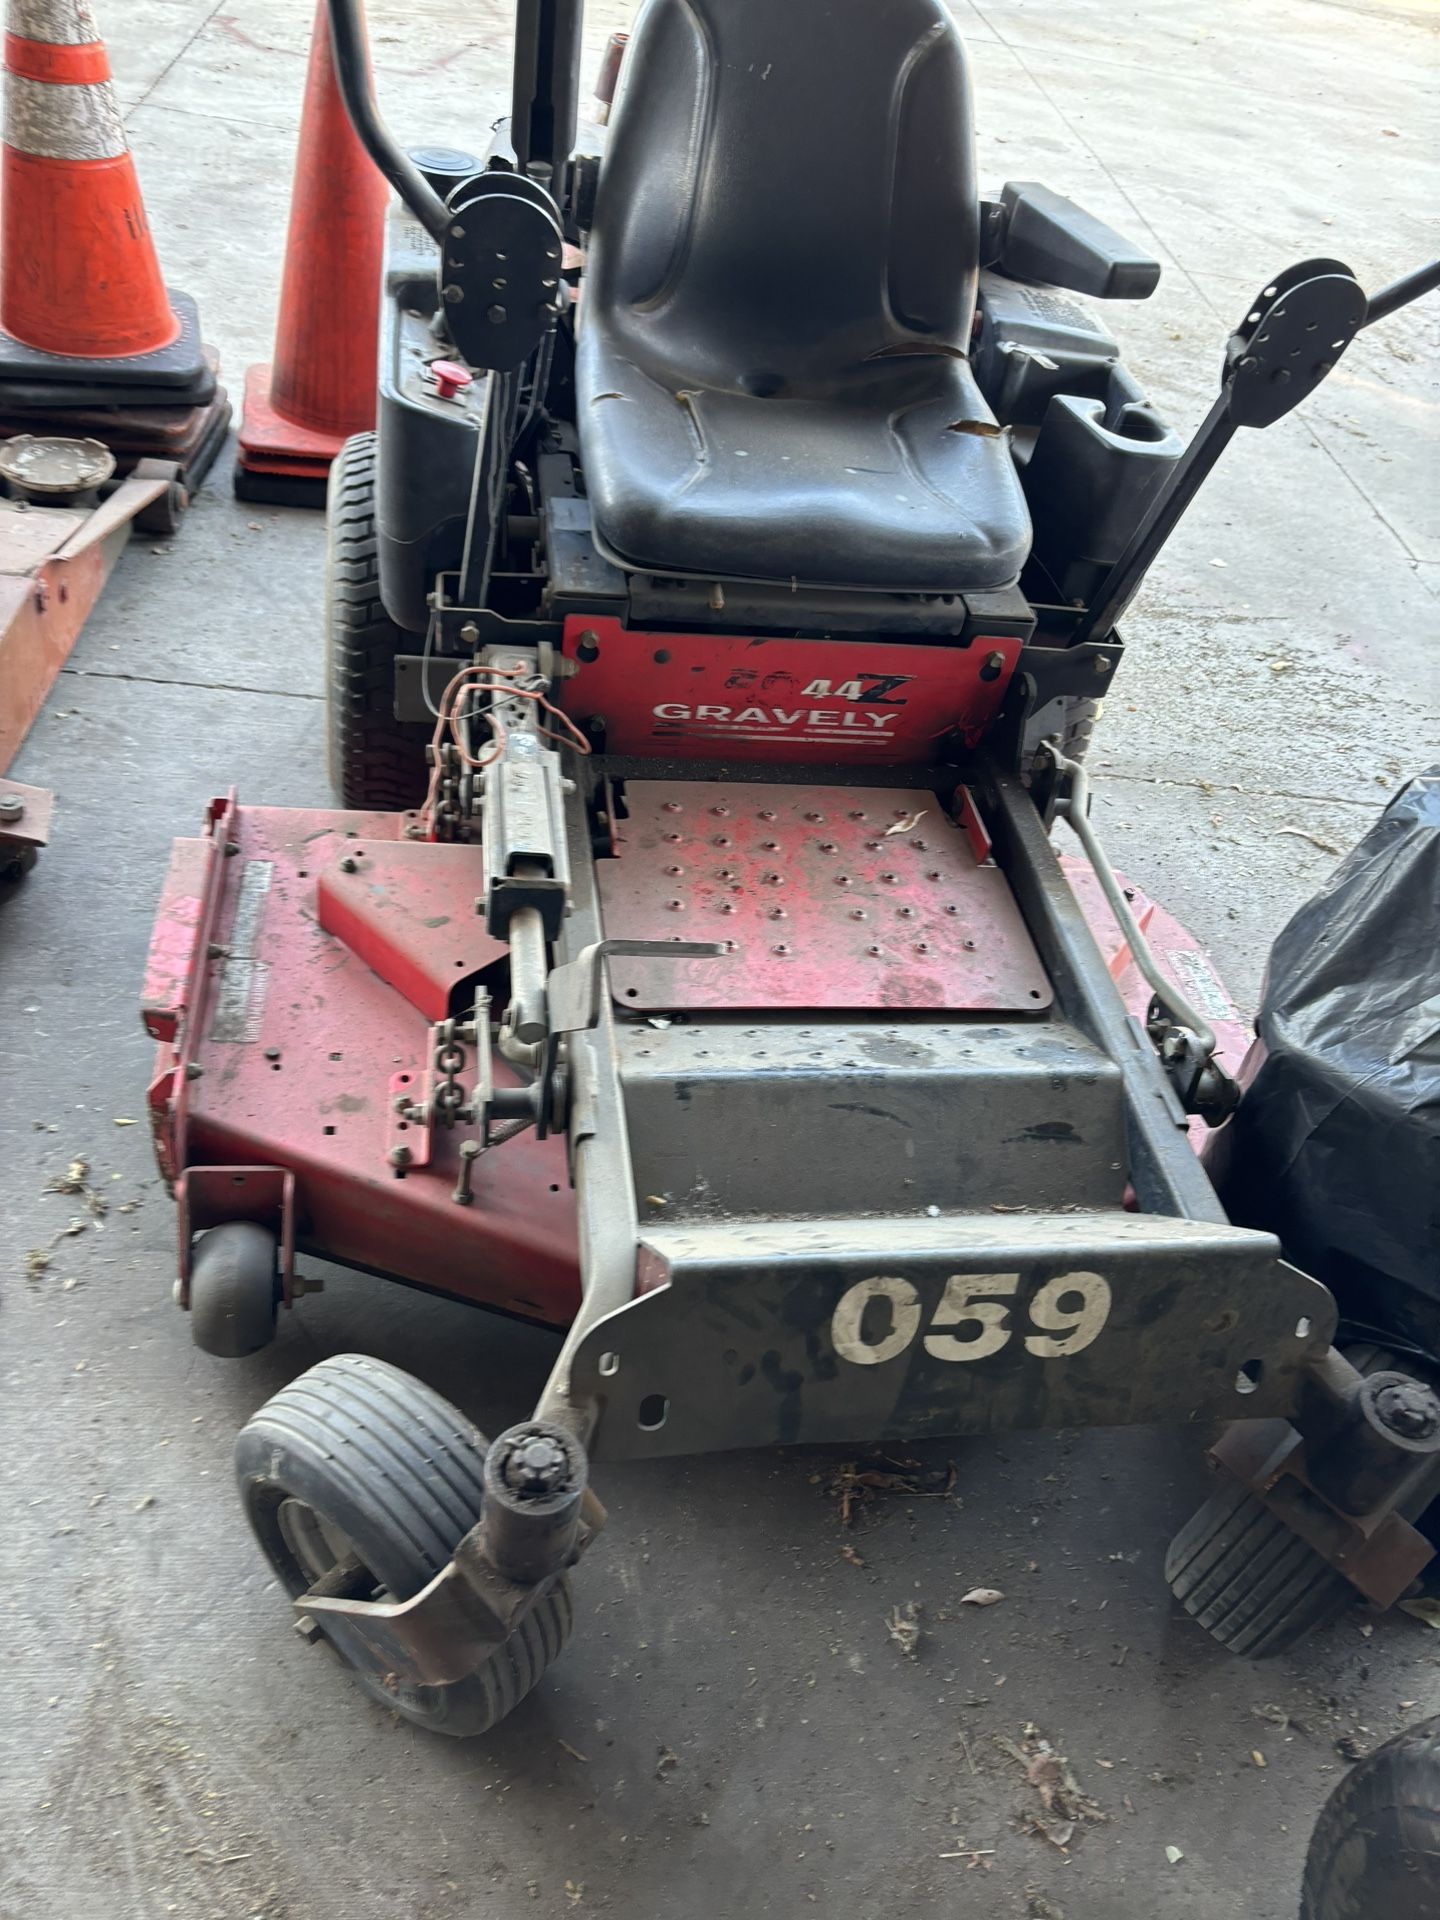 Tractor Lawn Mower Gravely 44z